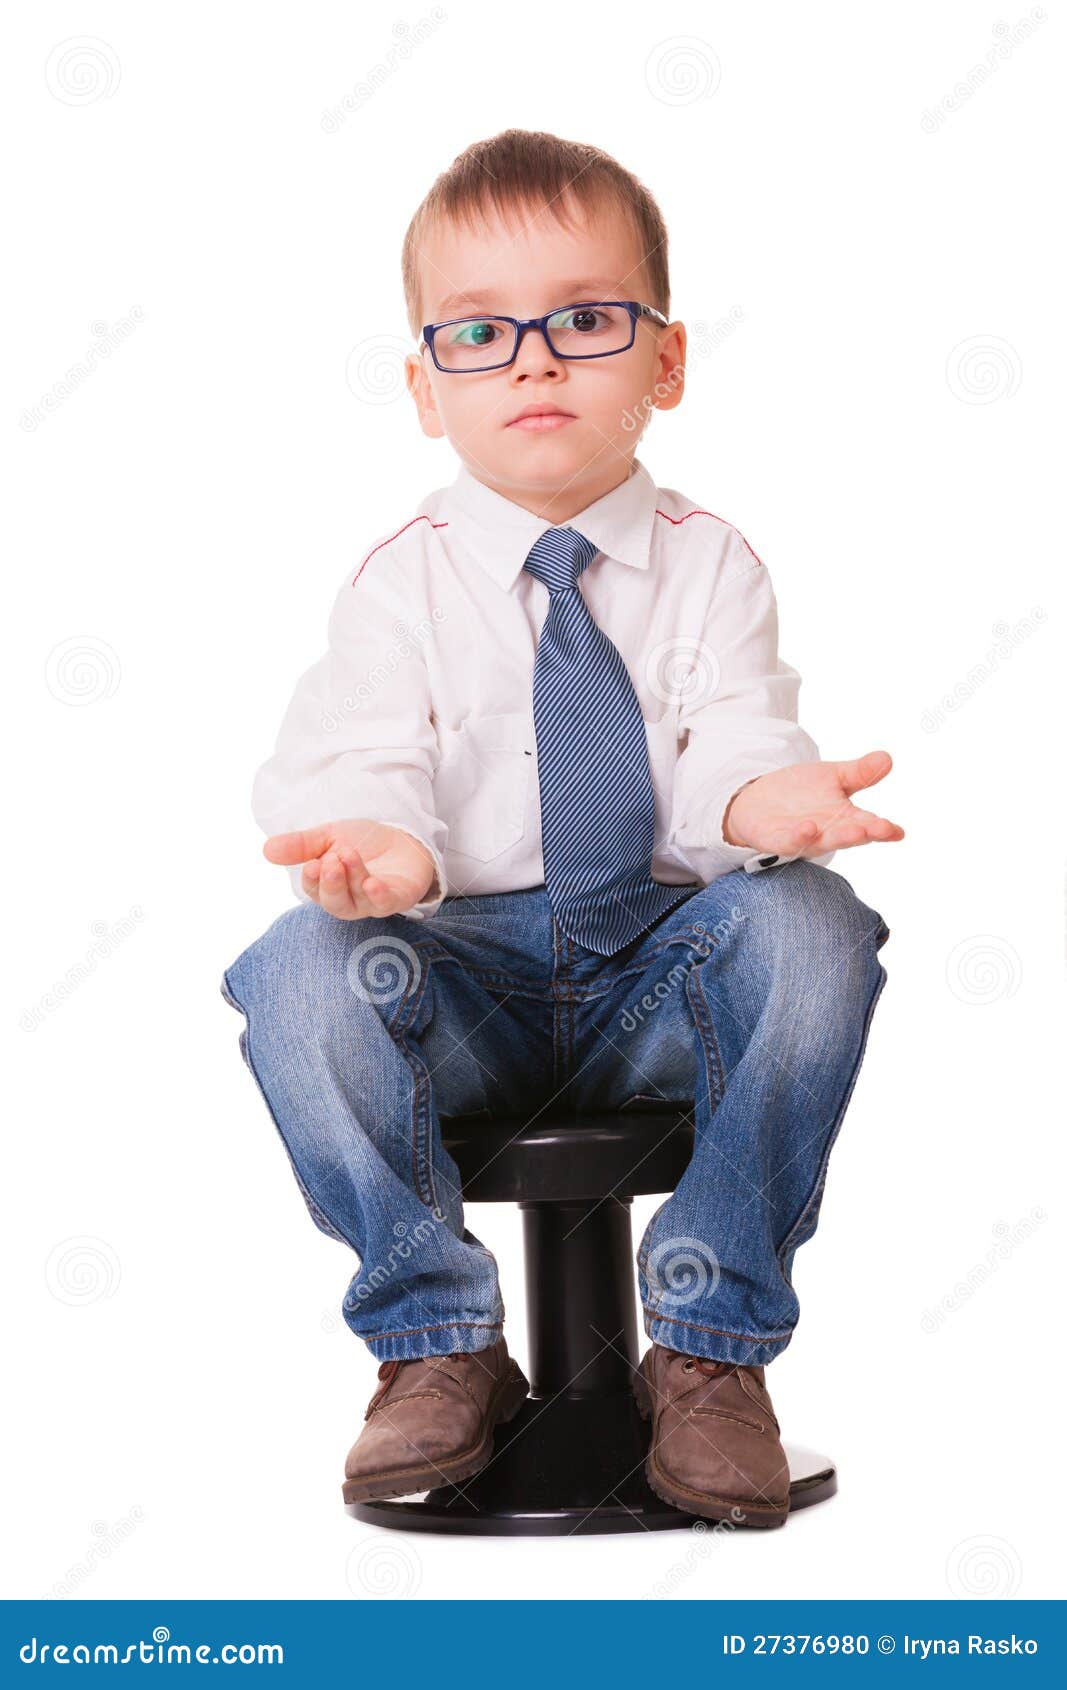 I Don't Know What To Do Stock Photo - Image: 27376980